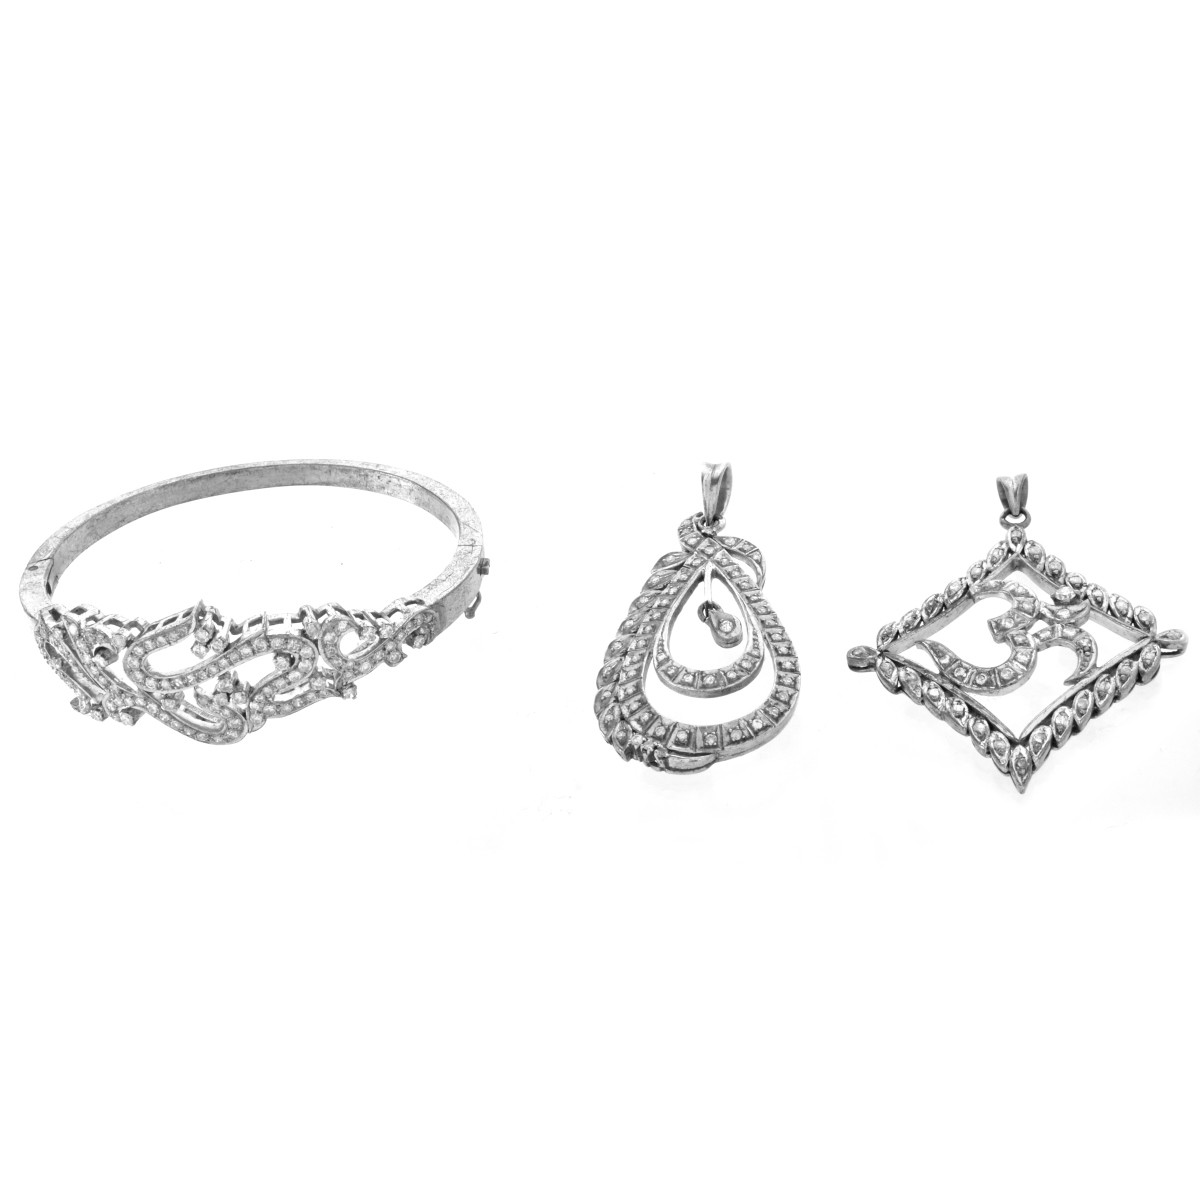 Indian Diamond and Silver Jewelry